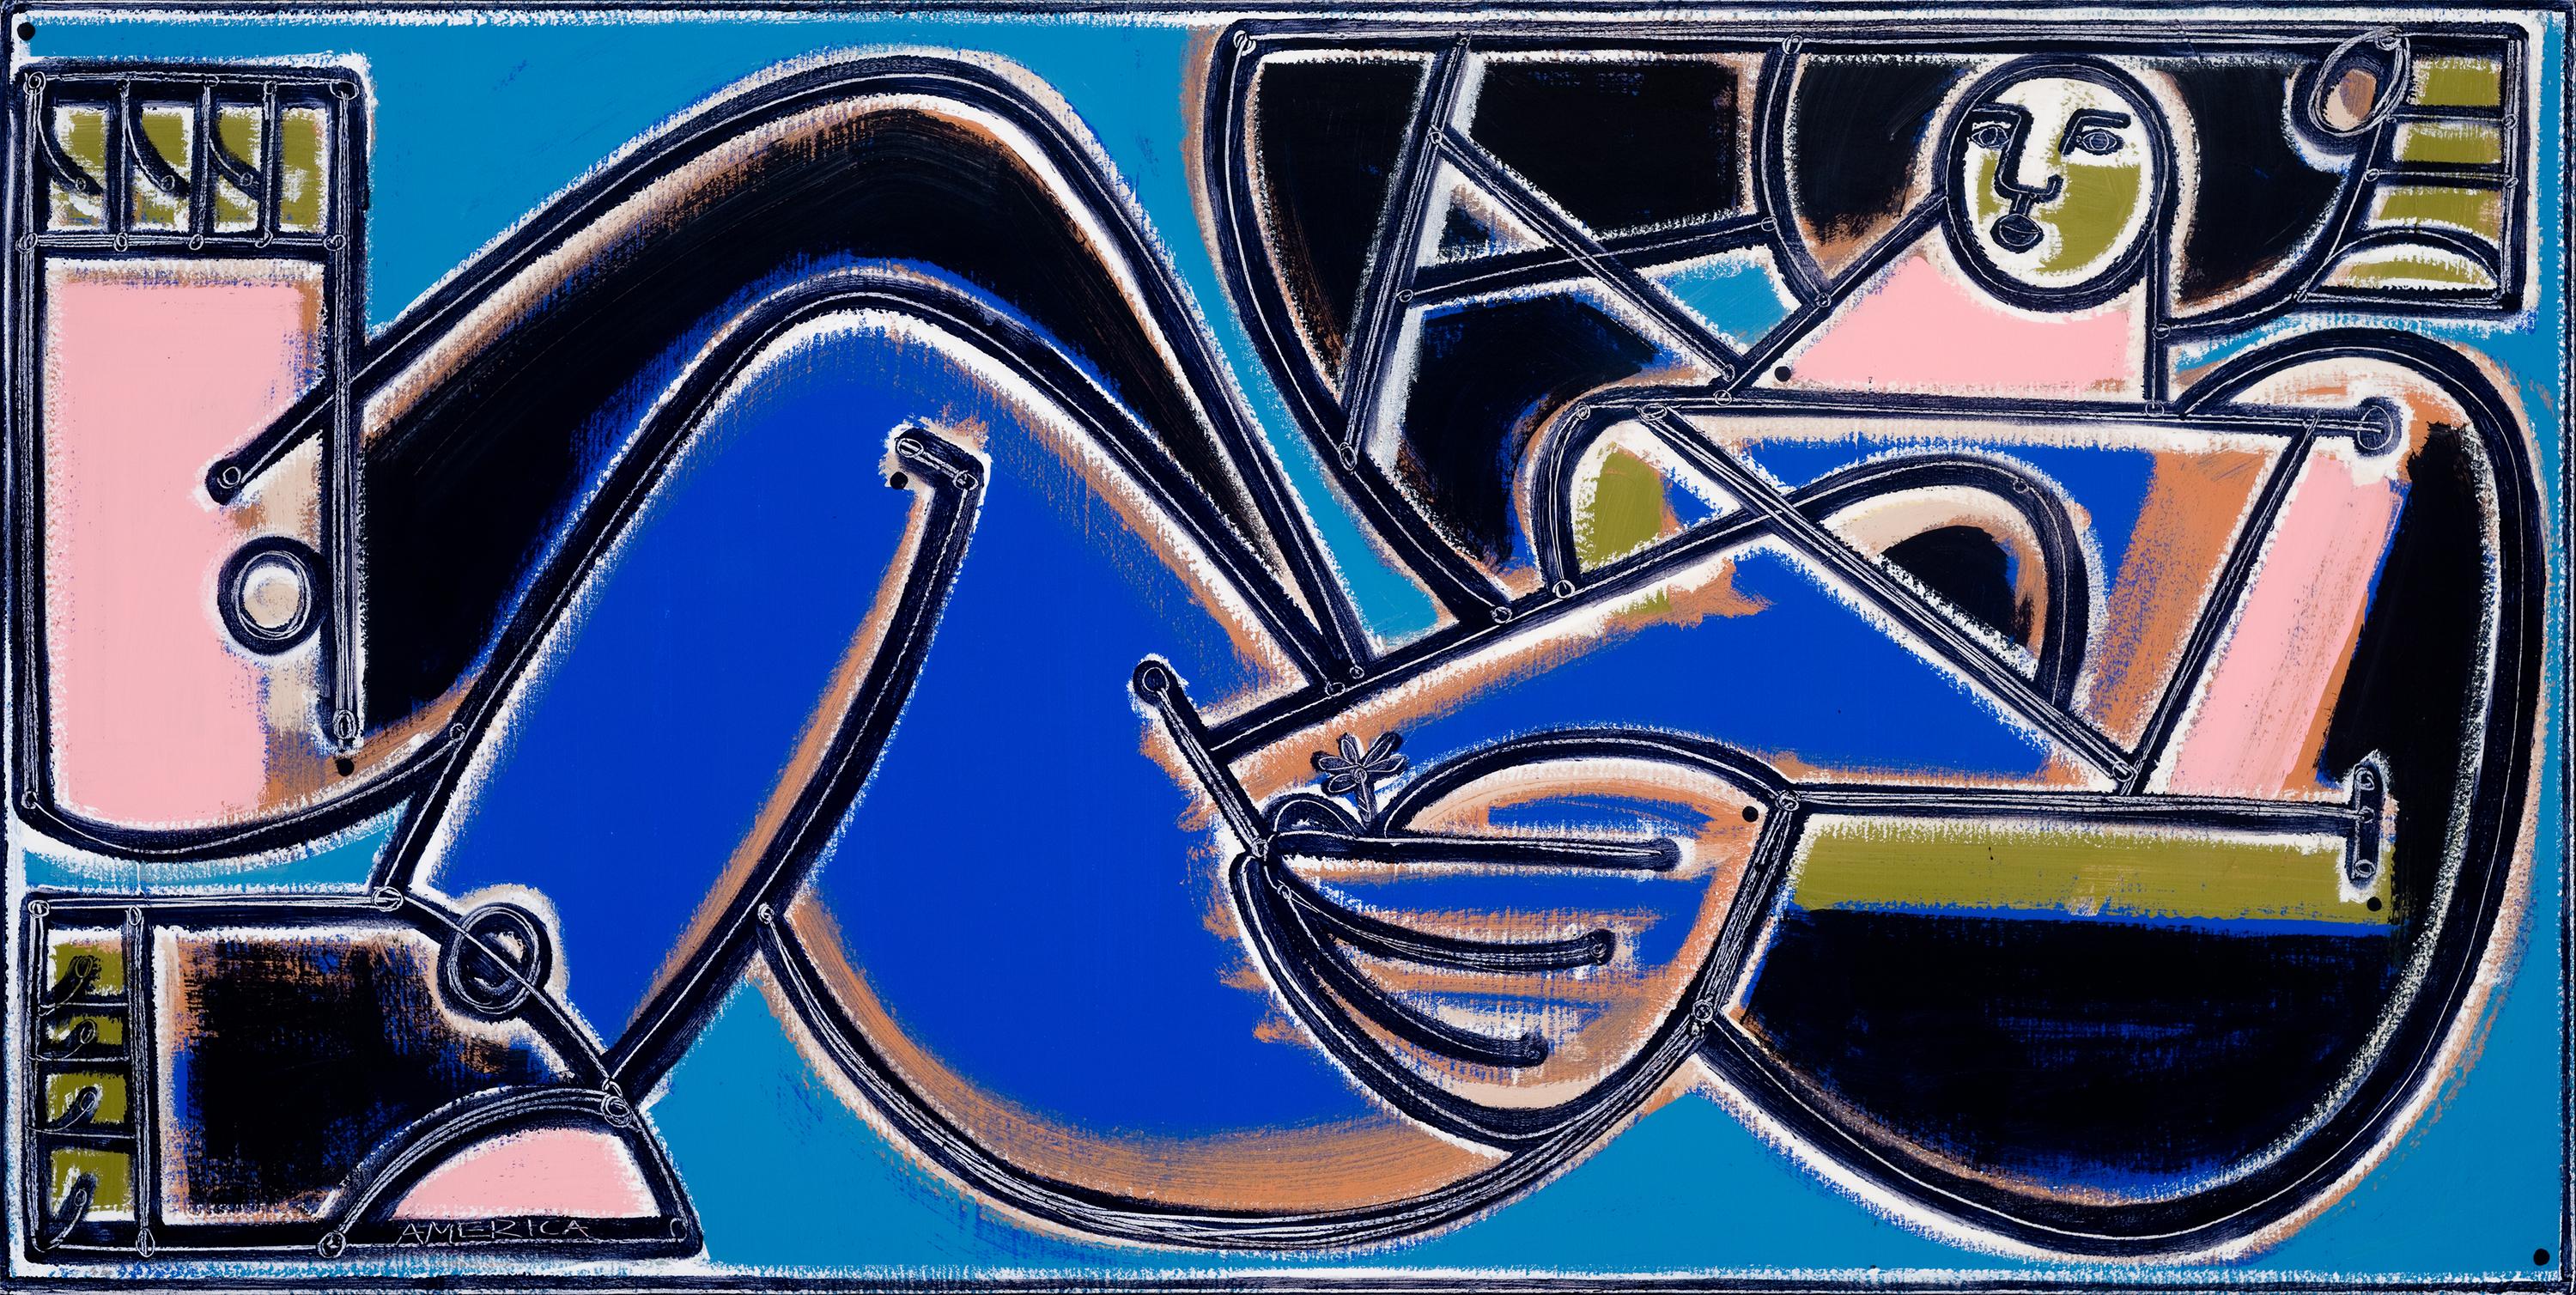 A figurative painting done by America Martin in oil and acrylic paints on canvas. Exploring the bounds of gestural abstraction, Martin's figure is tightly cropped within the bounds of the canvas, blurring the lines of where figure ends and begins.